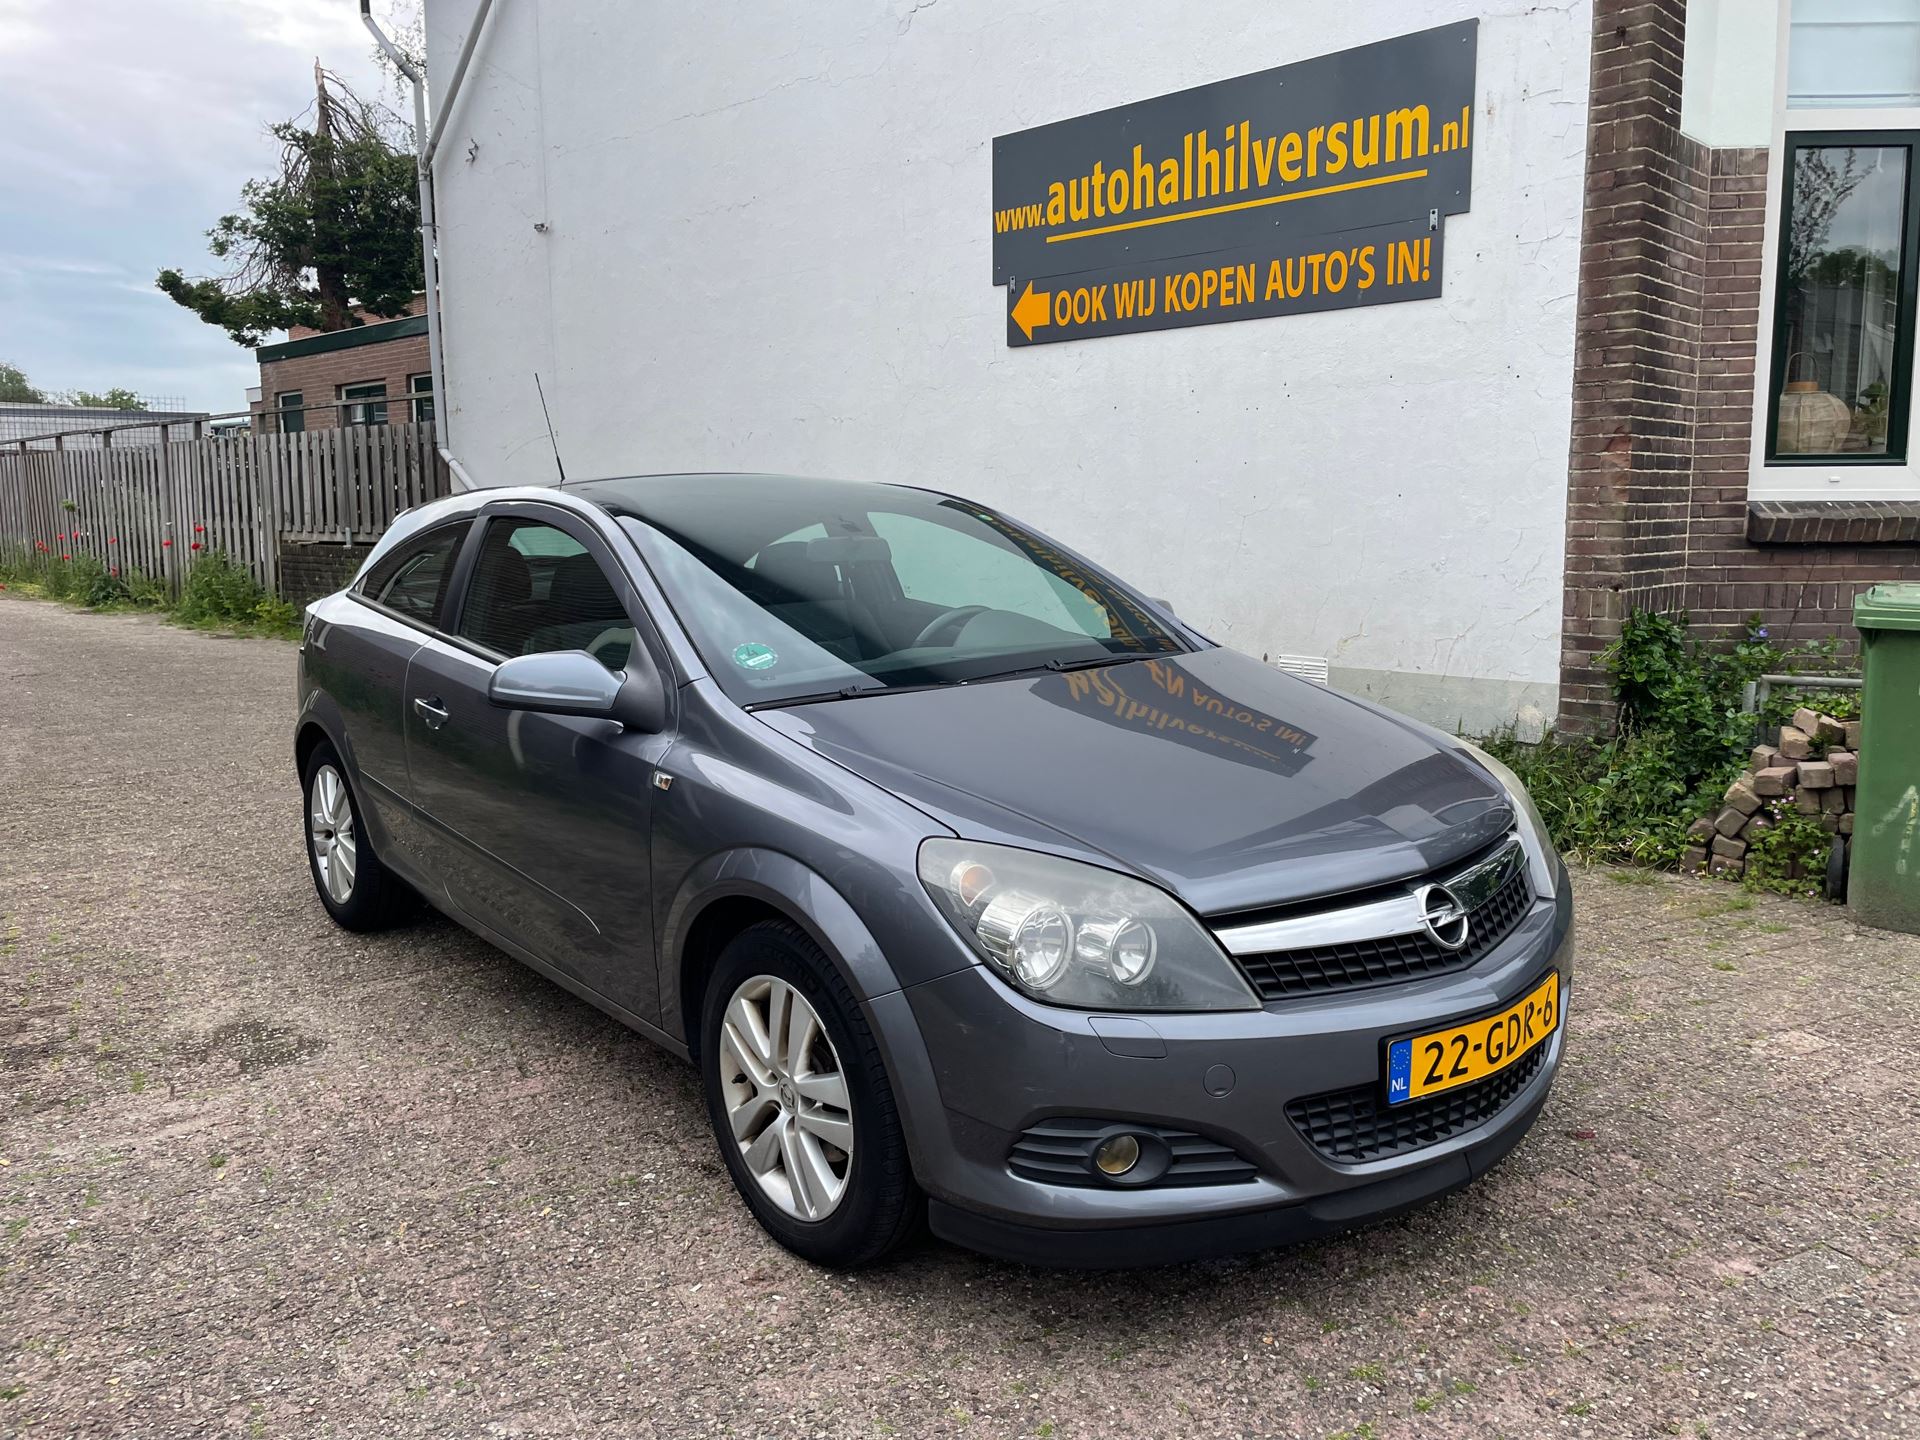 Opel Astra GTC occasion - Autohal Hilversum